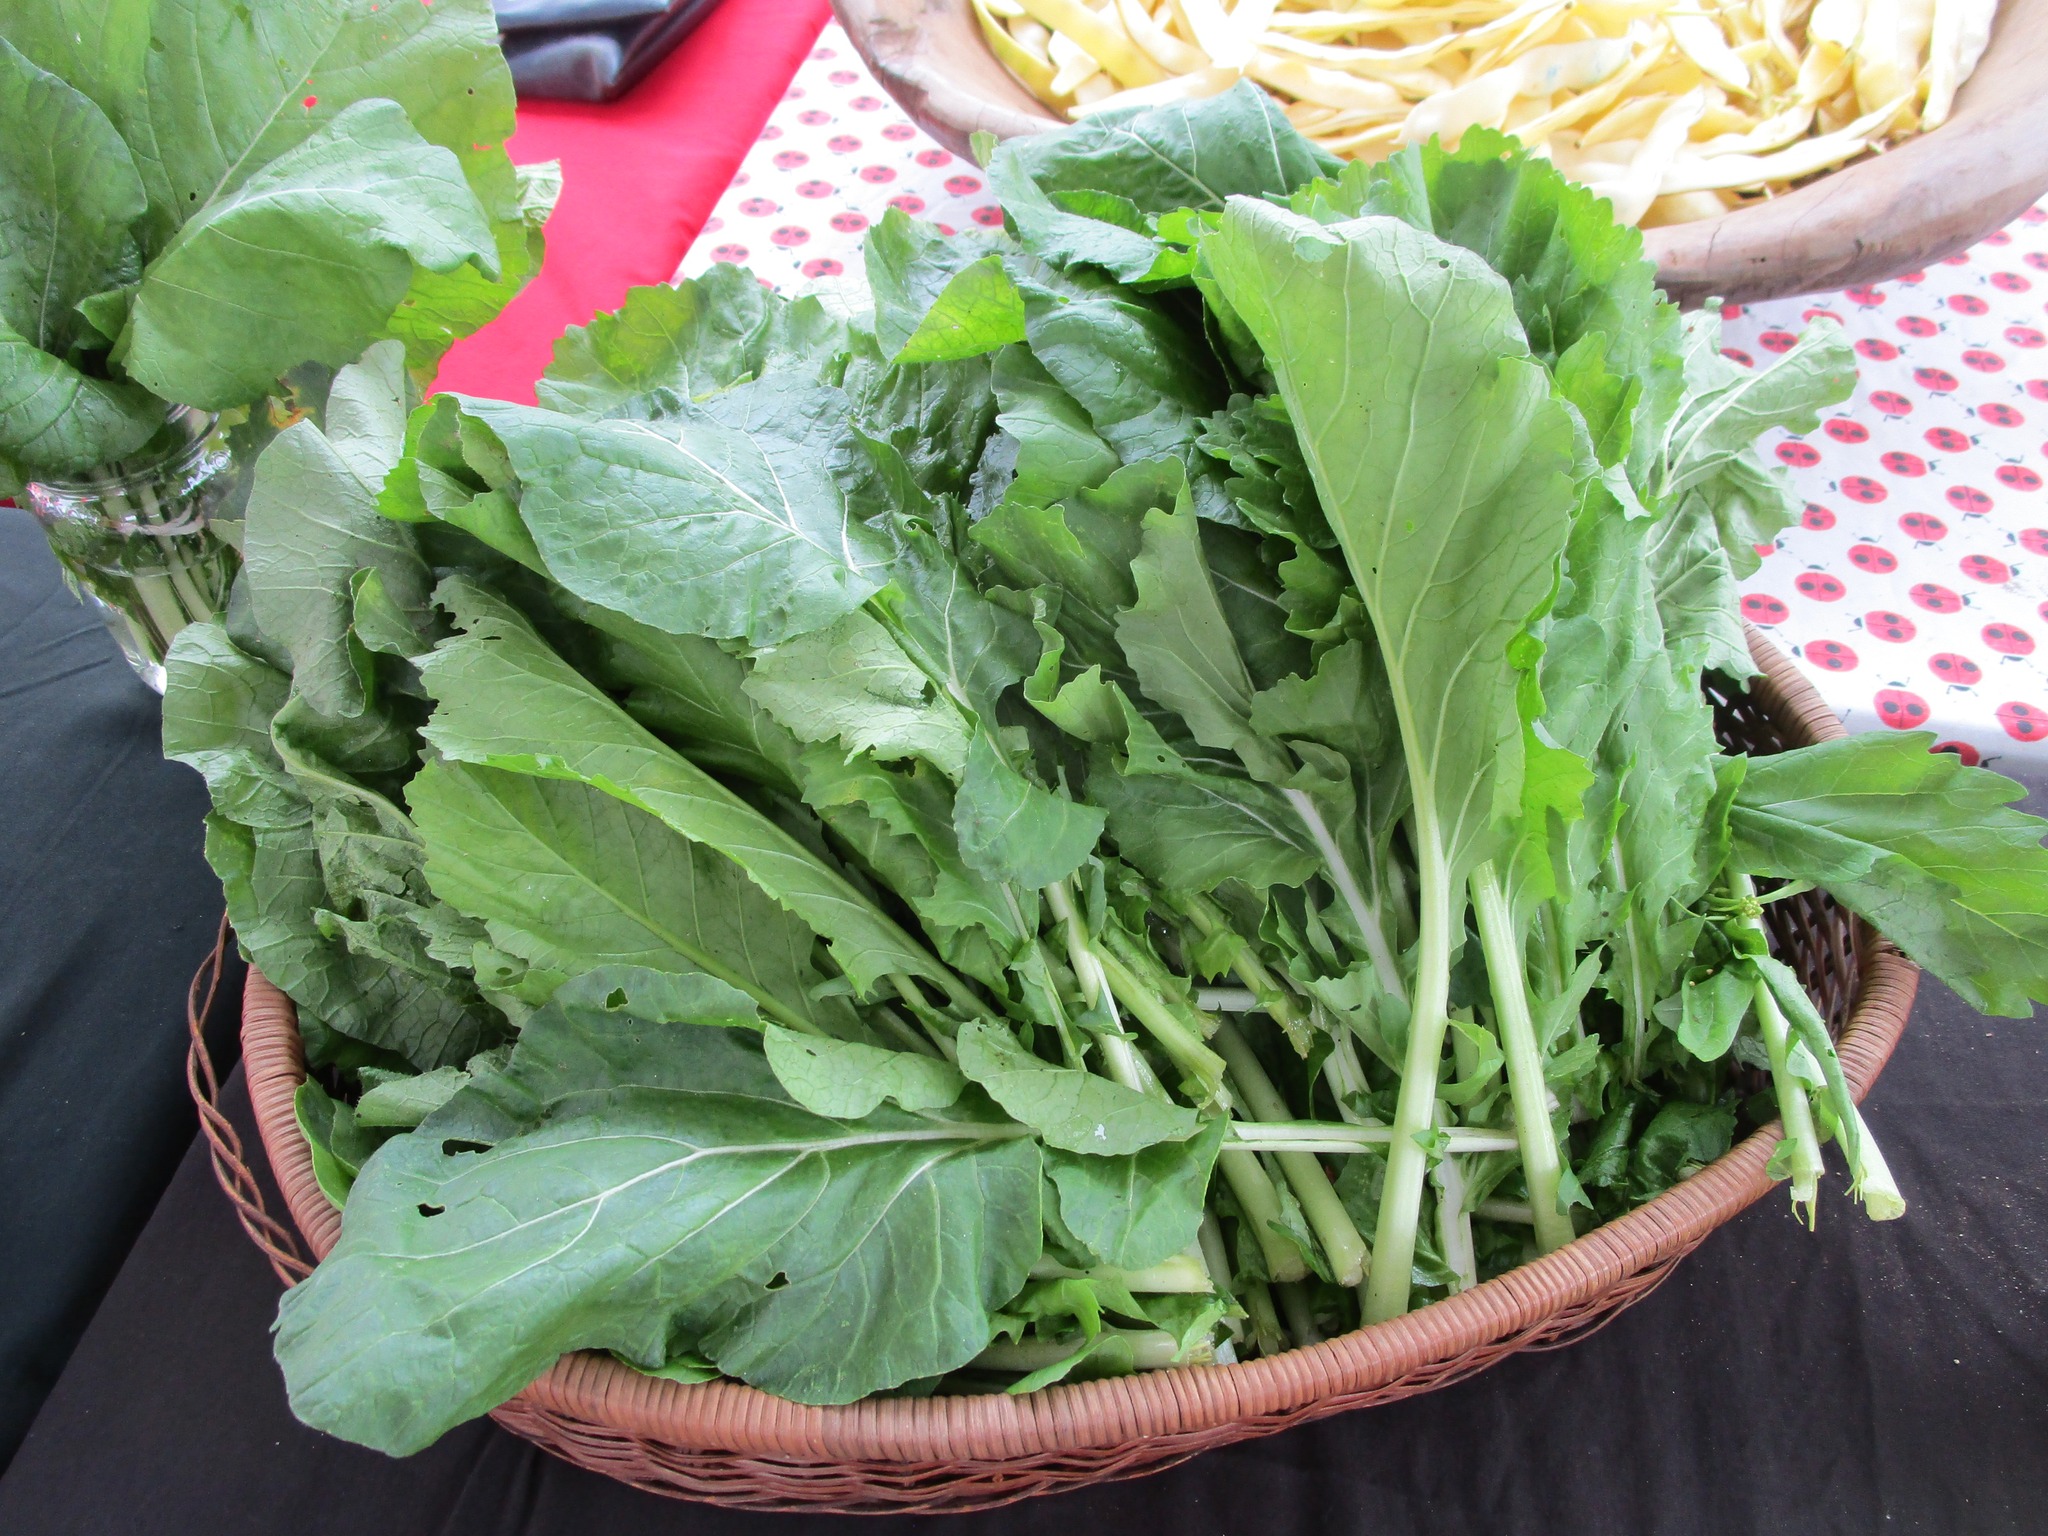 Winter wellness involves a nourishing journey with leafy greens